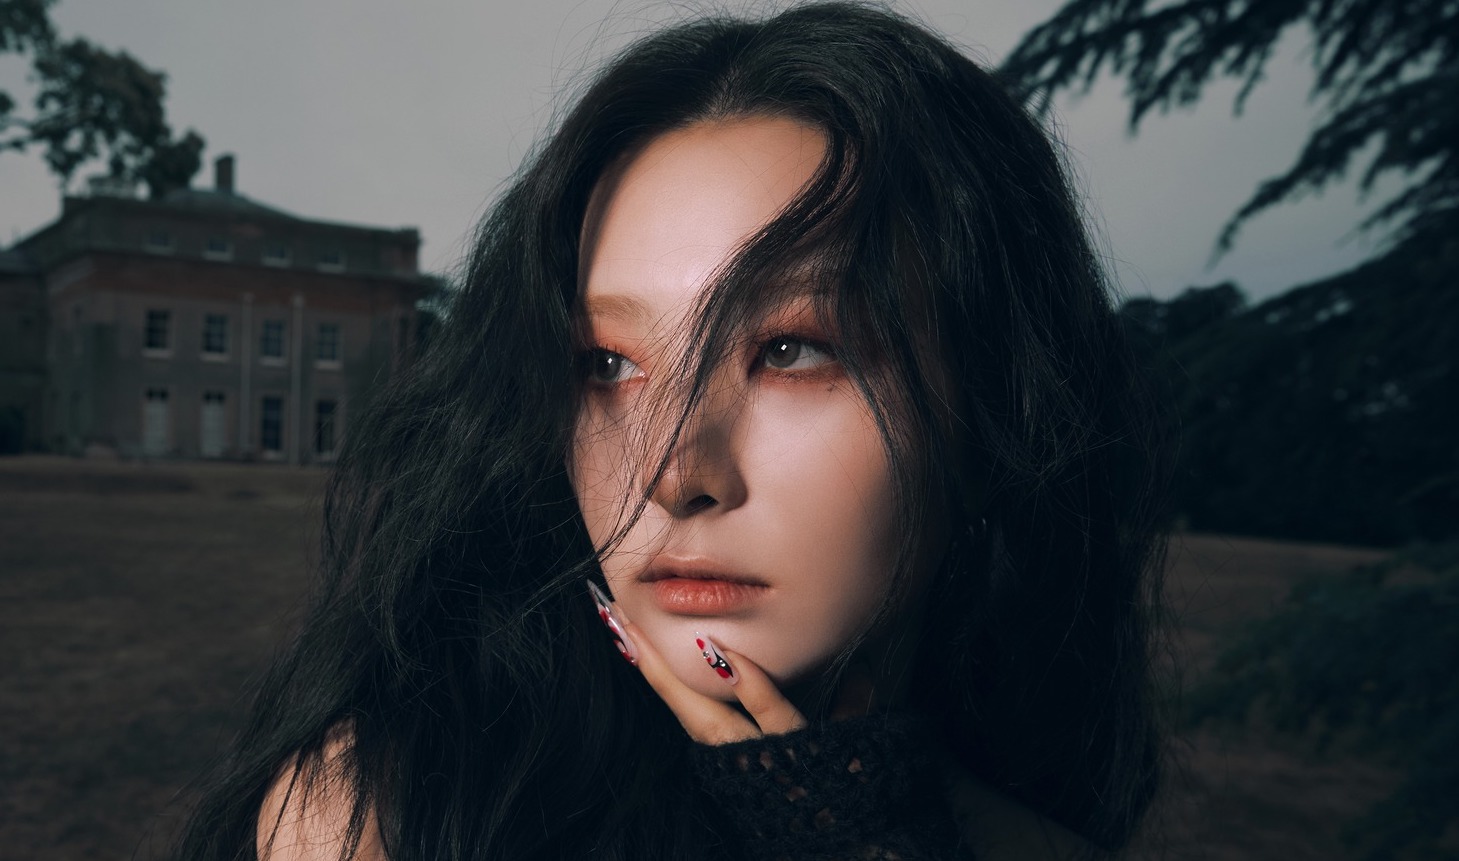 Red Velvet Seulgi Breaks New Sales Career Record On Day One With “28 Reasons”